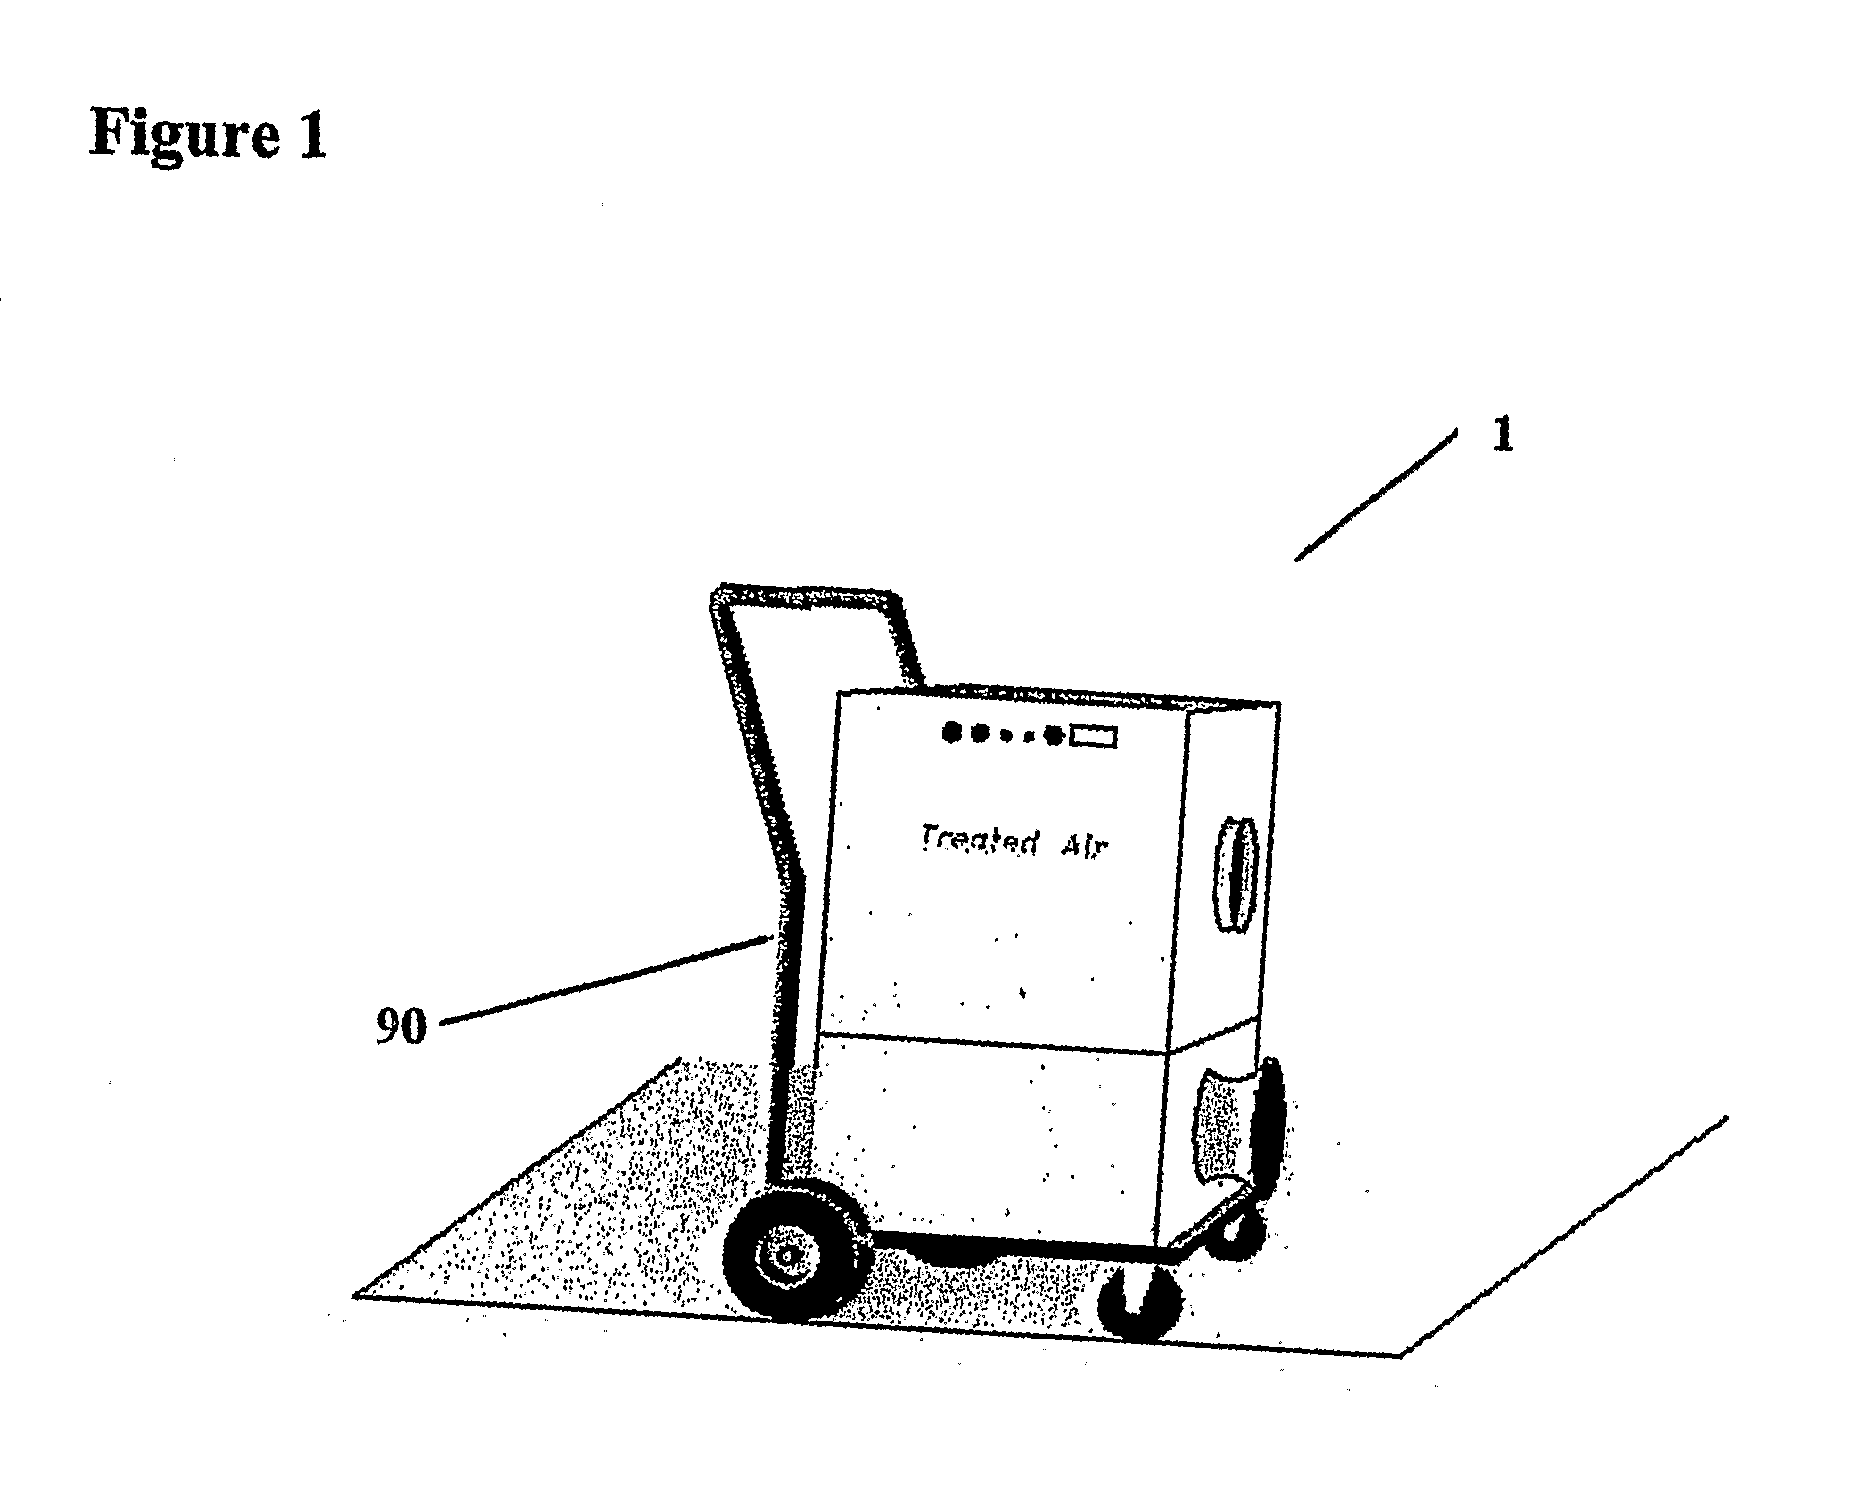 Apparatus and Method for Using Ozone as a Disinfectant